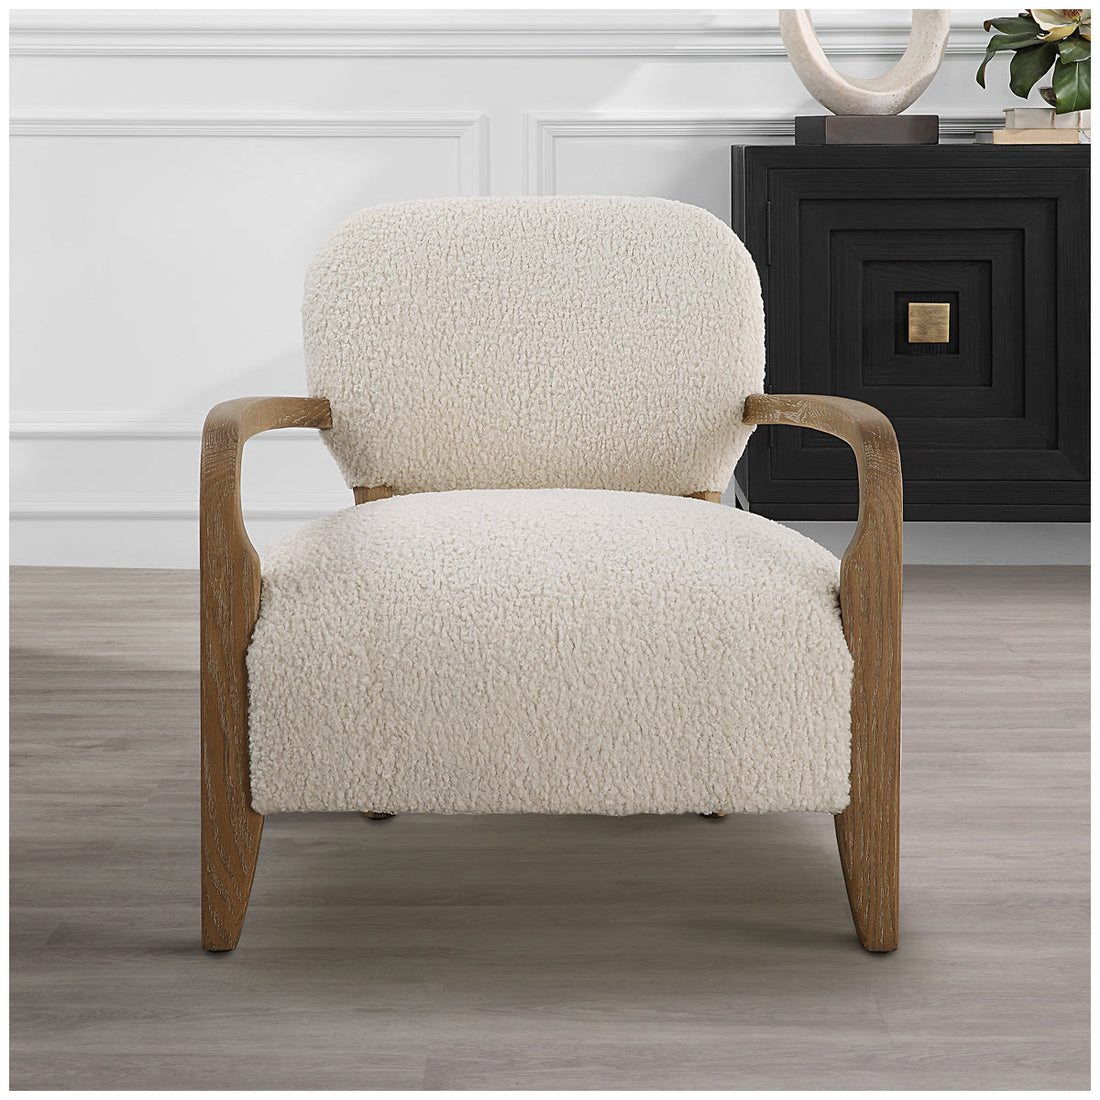 Uttermost Telluride Natural Shearling Accent Chair